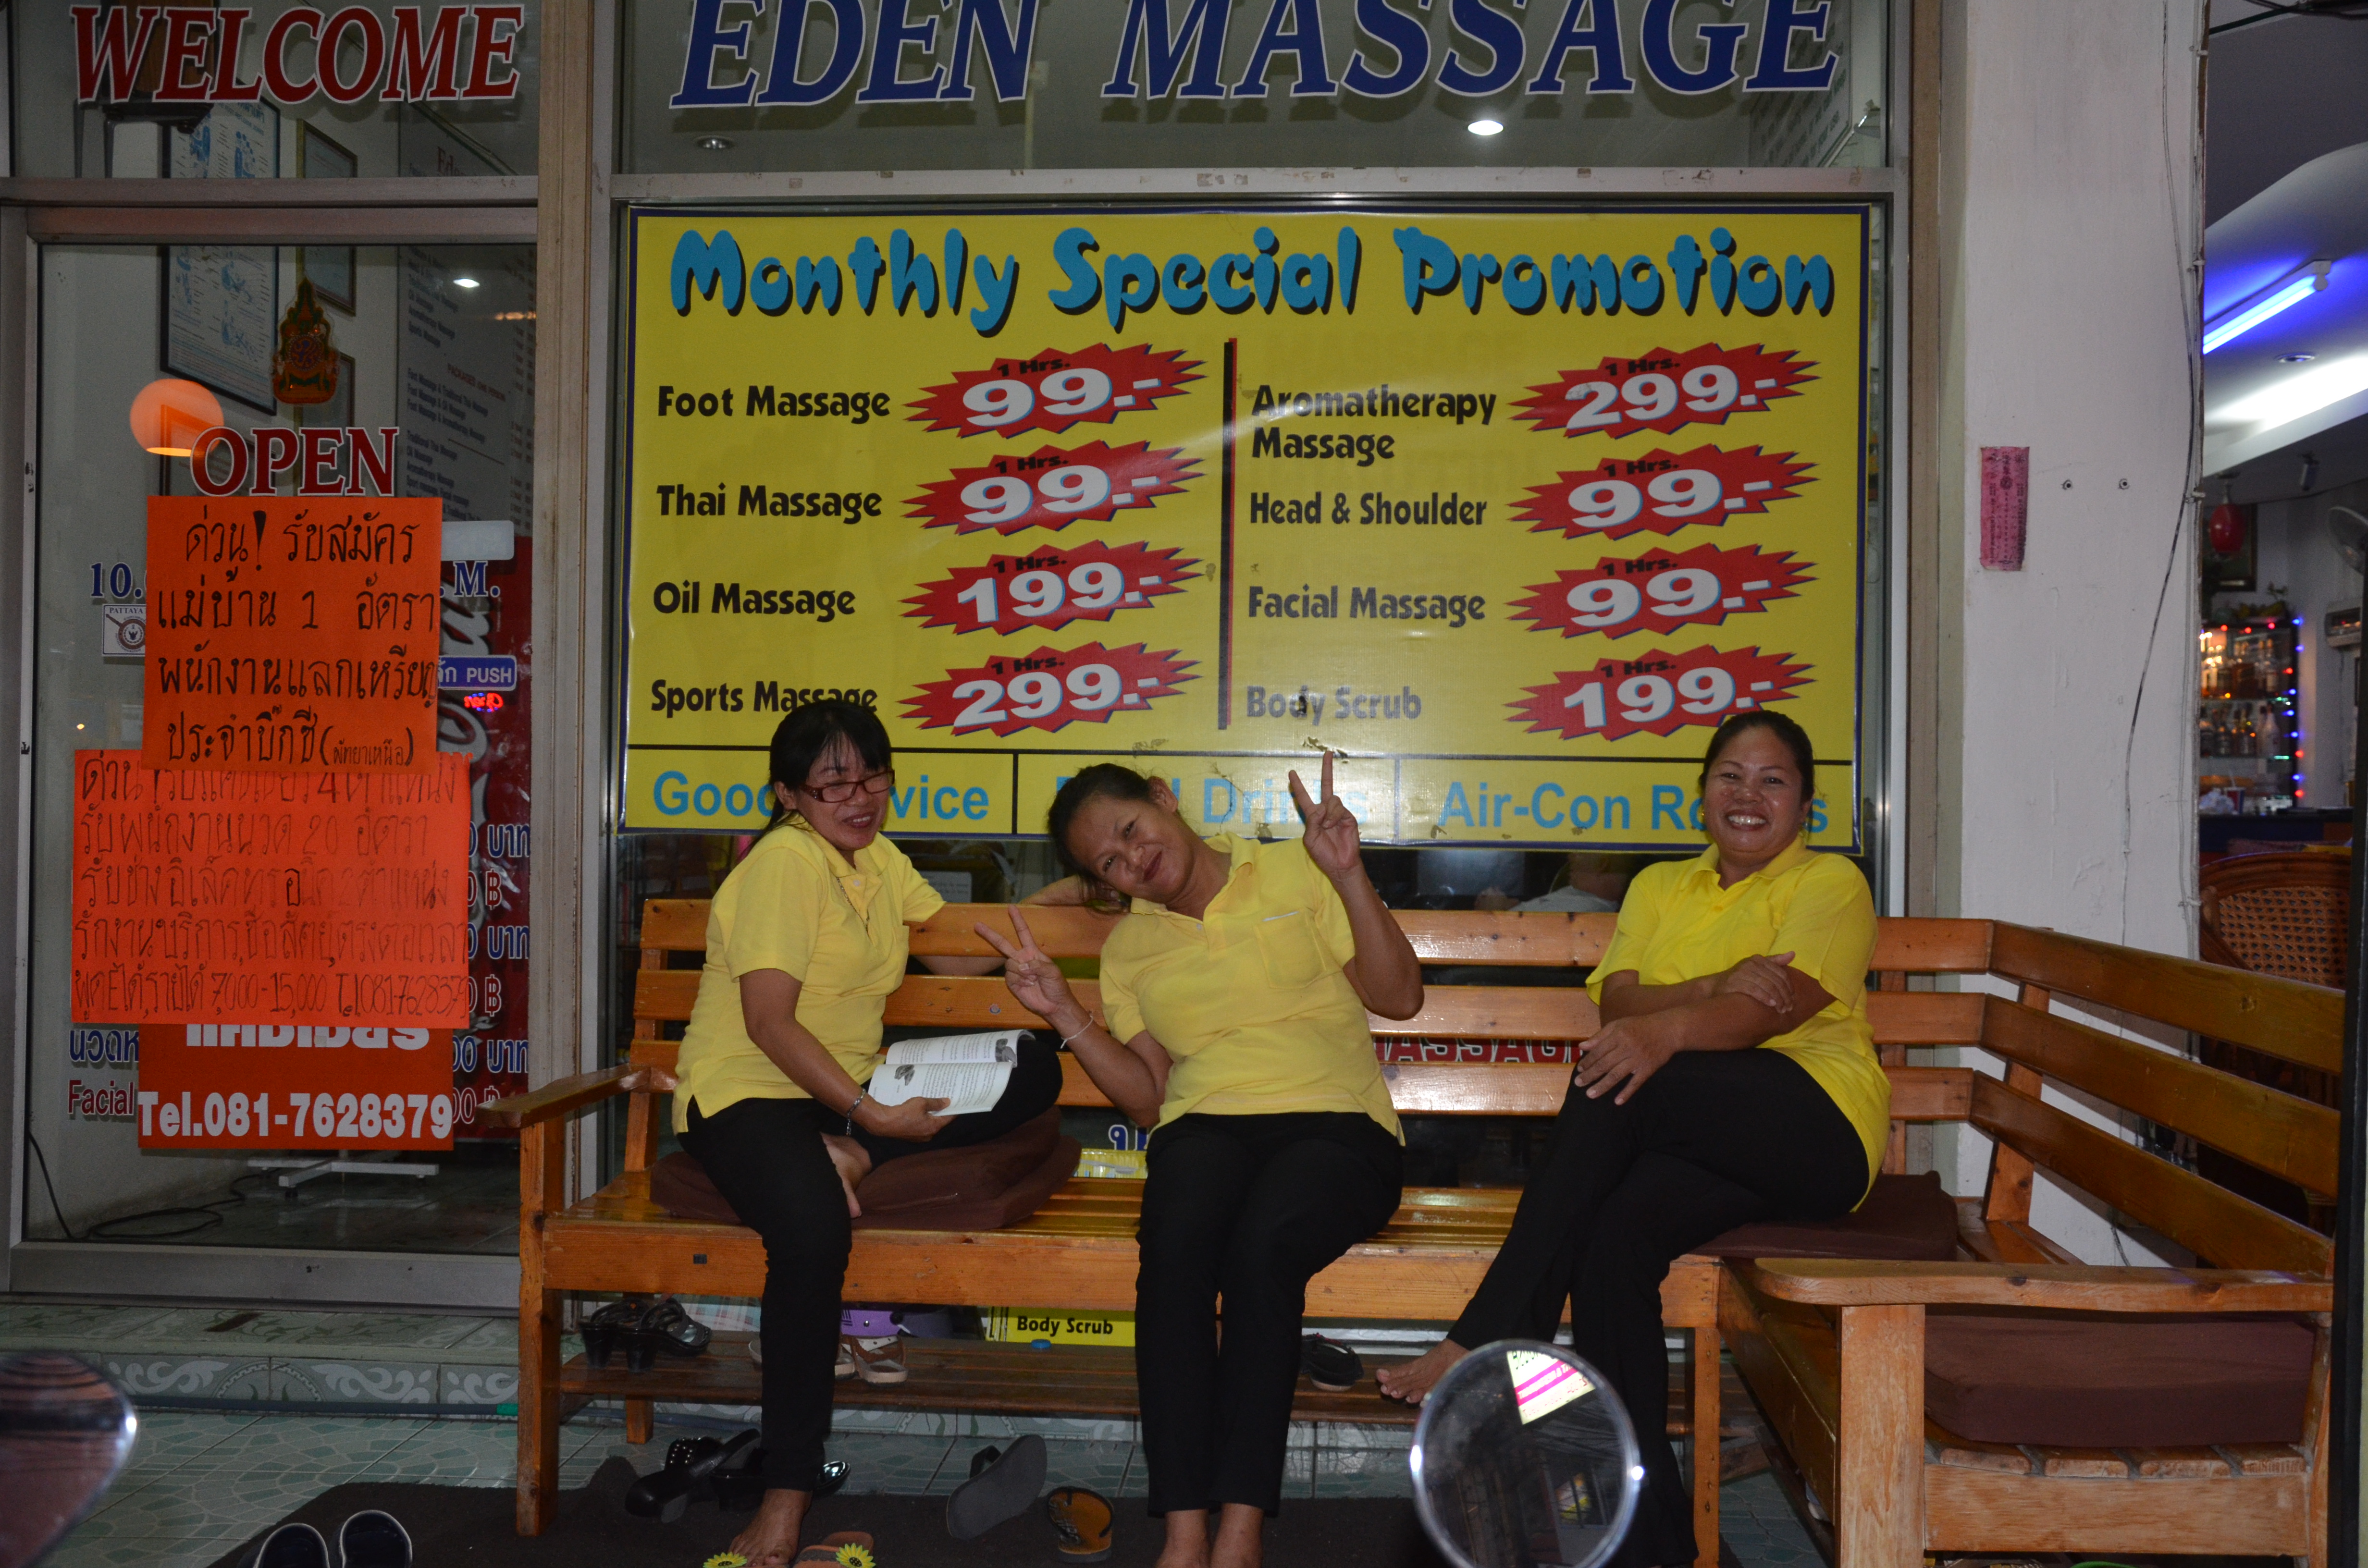 And tons of massage places too offering everything from regular massage to happy...